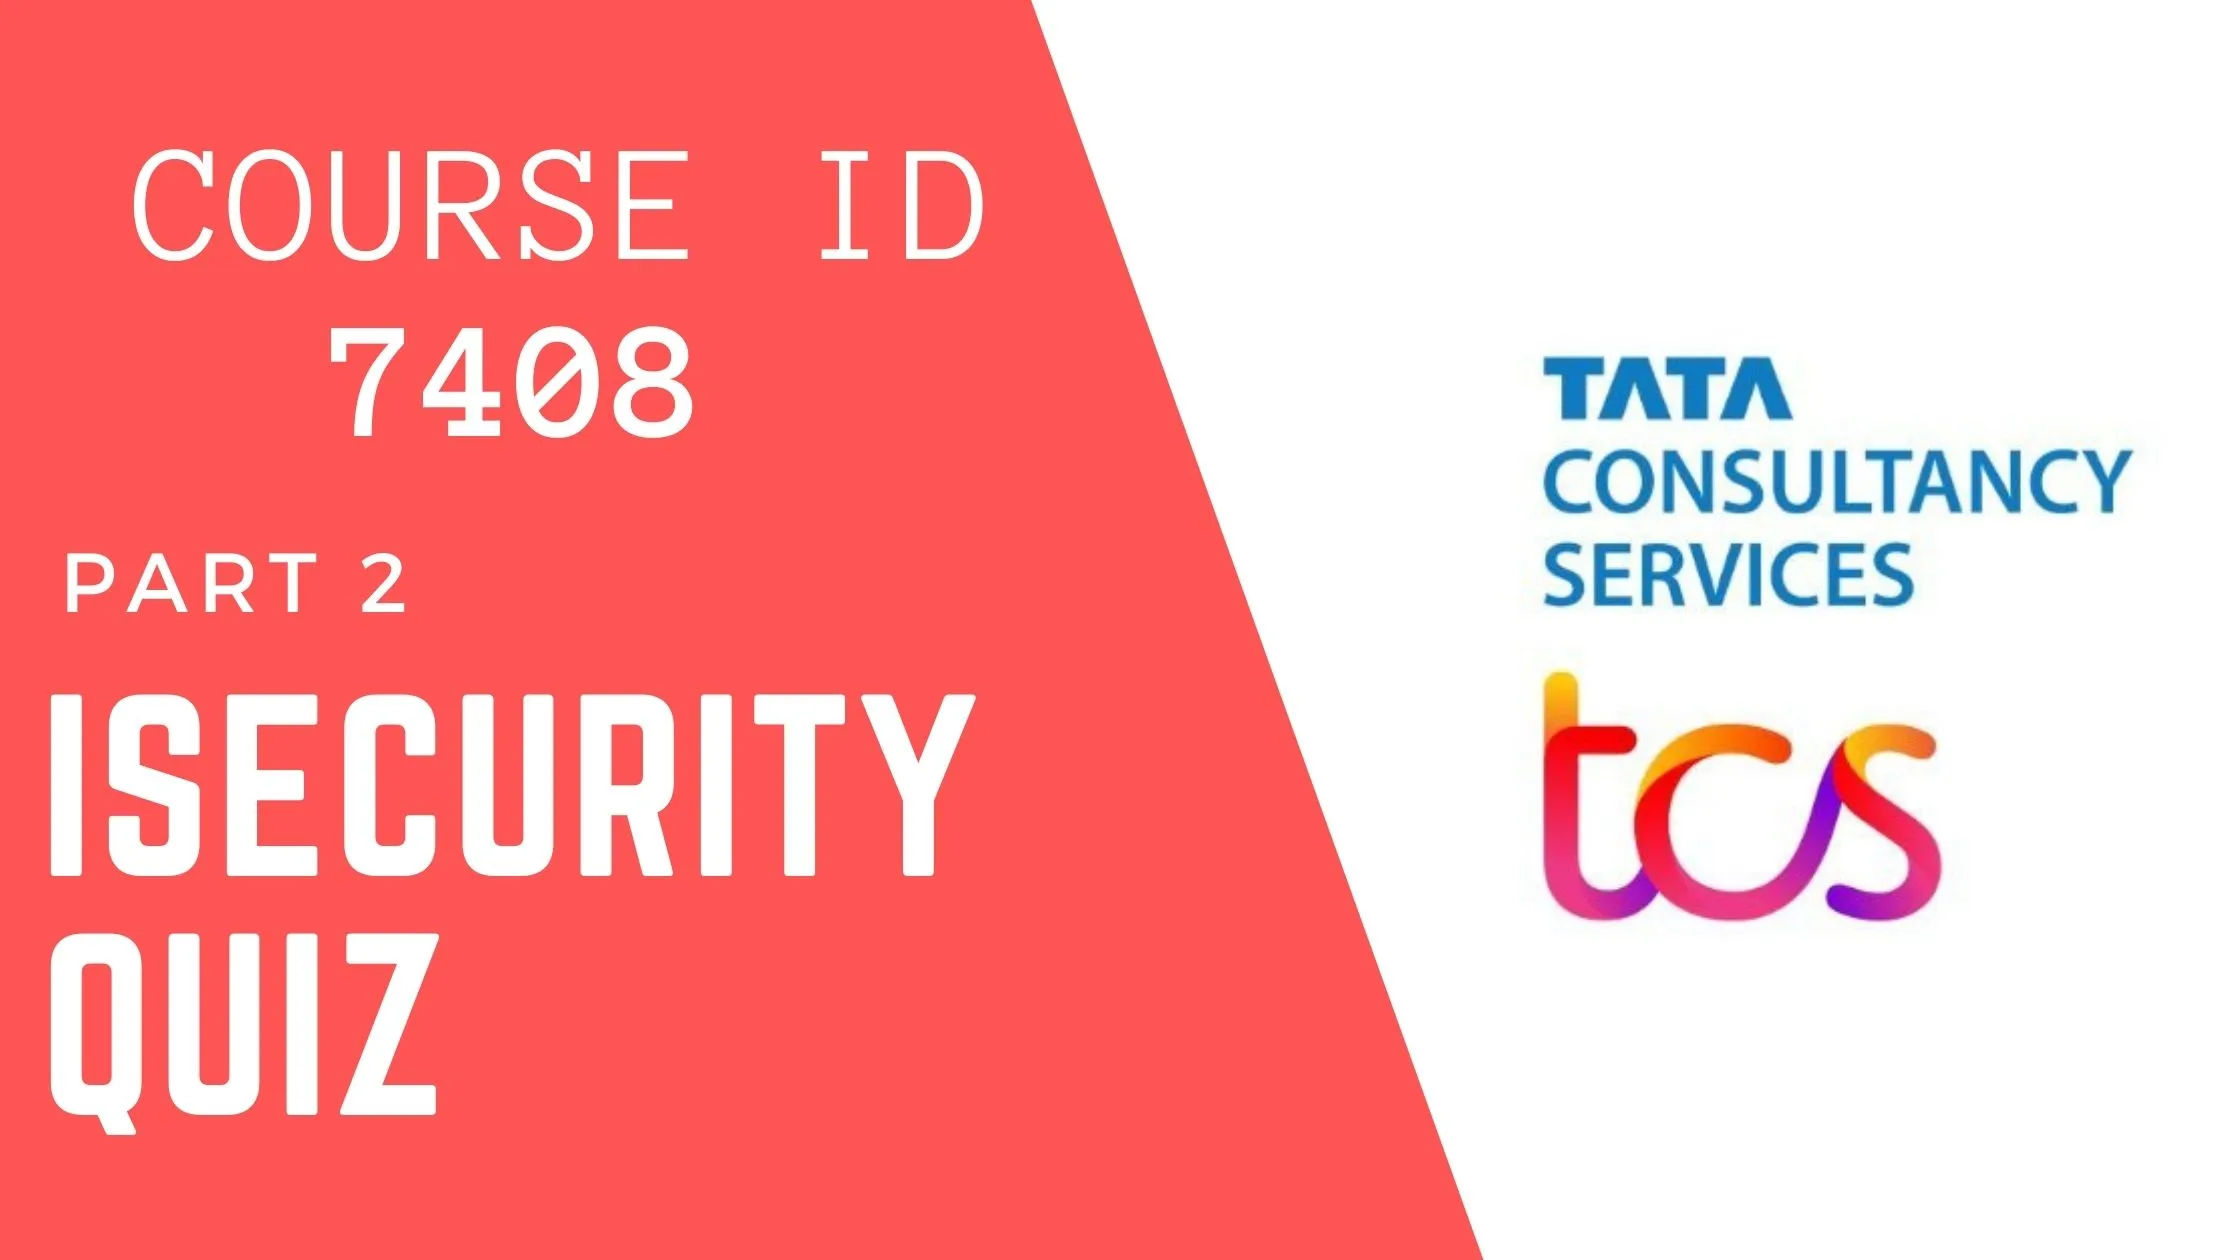 iSecurity Quiz Answers MCQ 2023 - Course Id - 7408 | TCS iEvolve MCQ | Part 2